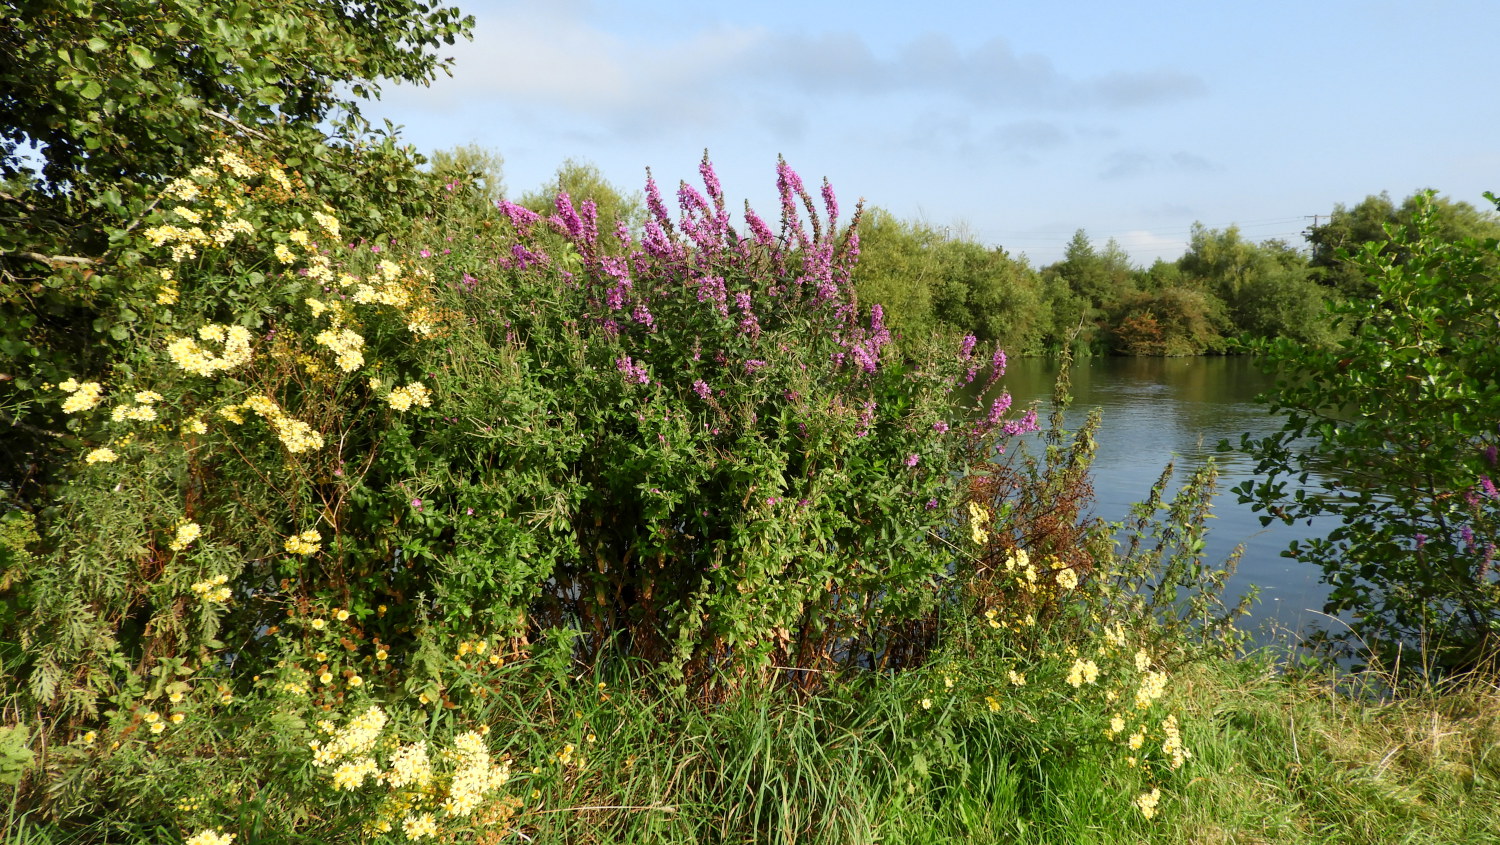 Colourful wildflowers in Thames Valley Park